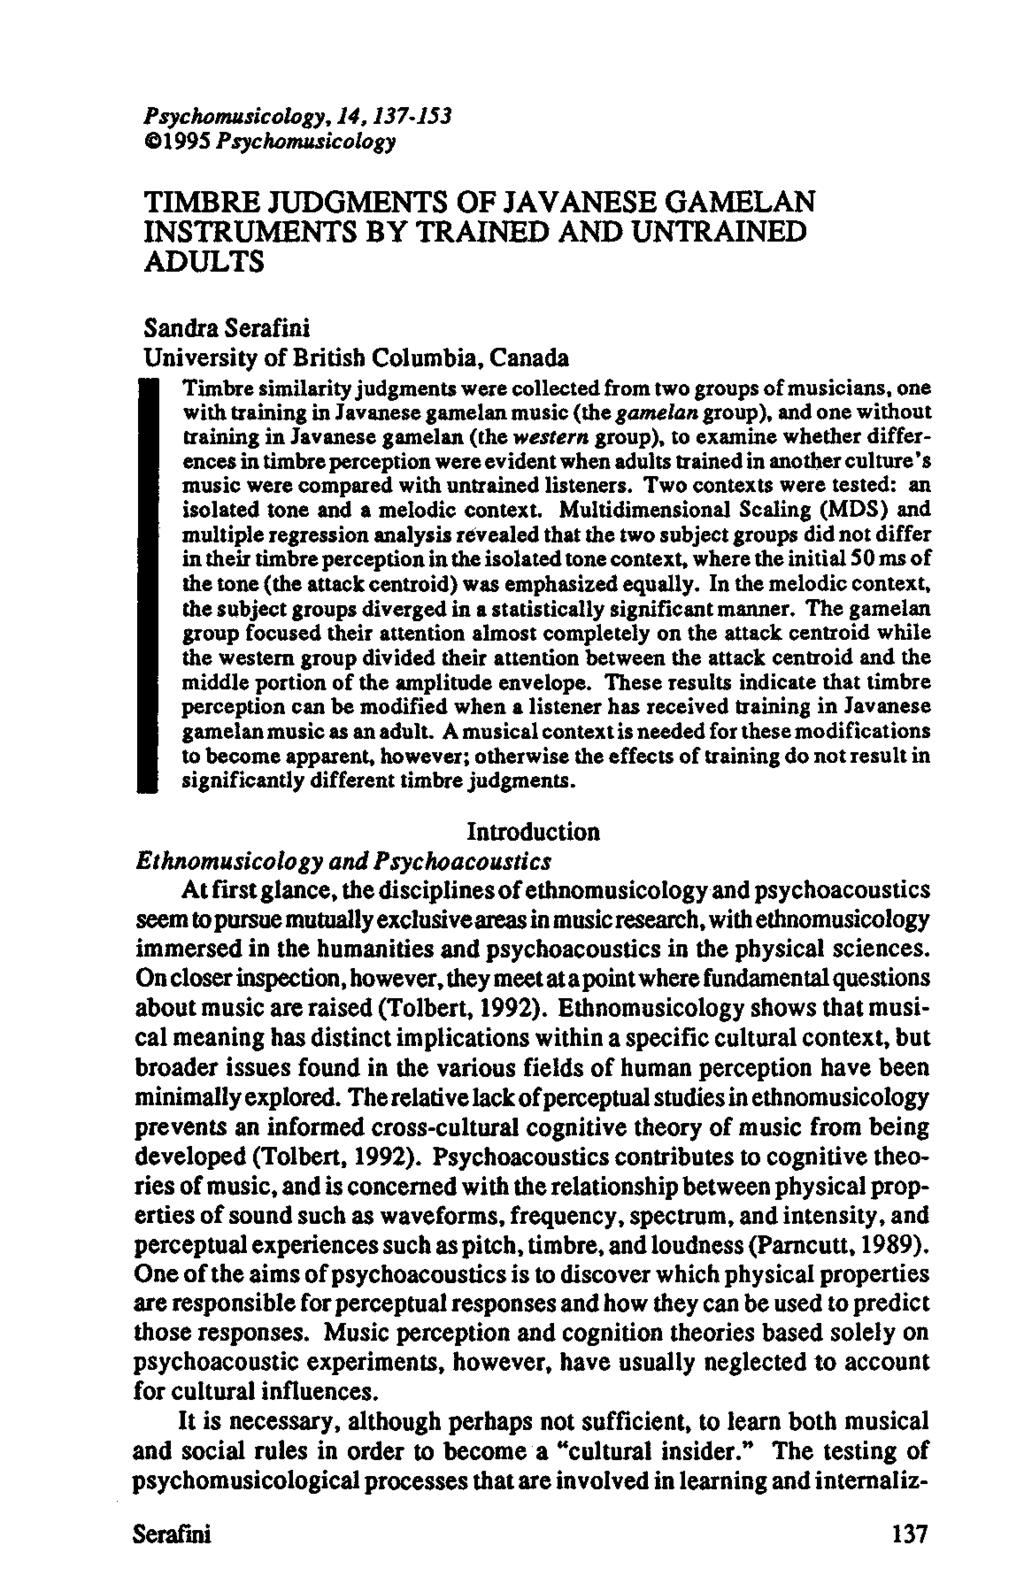 Psychomusicology, 14,137-153 1995 Psychomusicology TIMBRE JUDGMENTS OF JAVANESE GAMELAN INSTRUMENTS BY TRAINED AND UNTRAINED ADULTS Sandra Serafini University of British Columbia, Canada Timbre